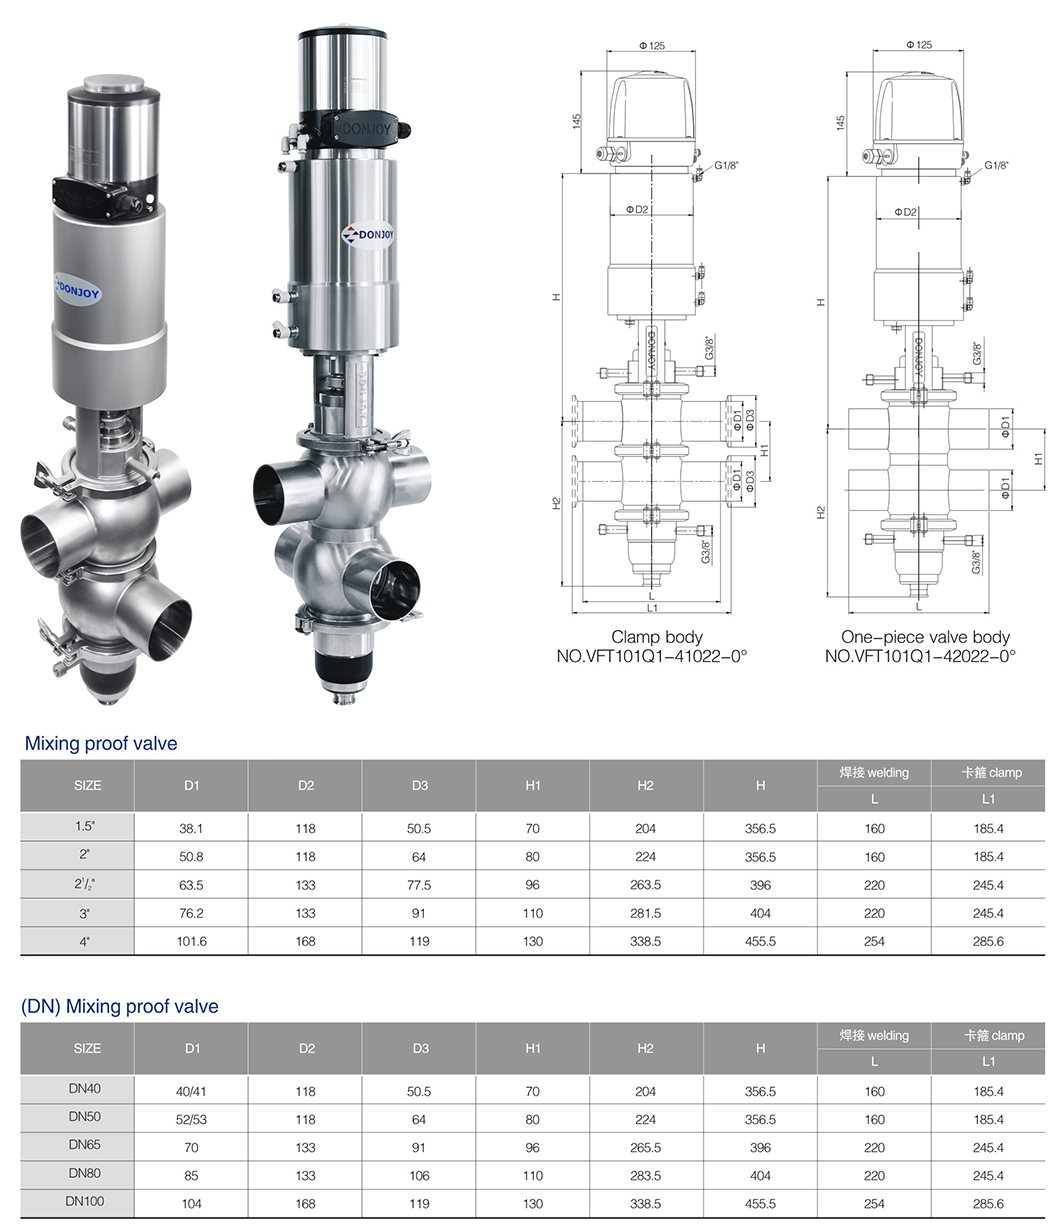 Sanitary Double Seat Mixproof Valve Dimension